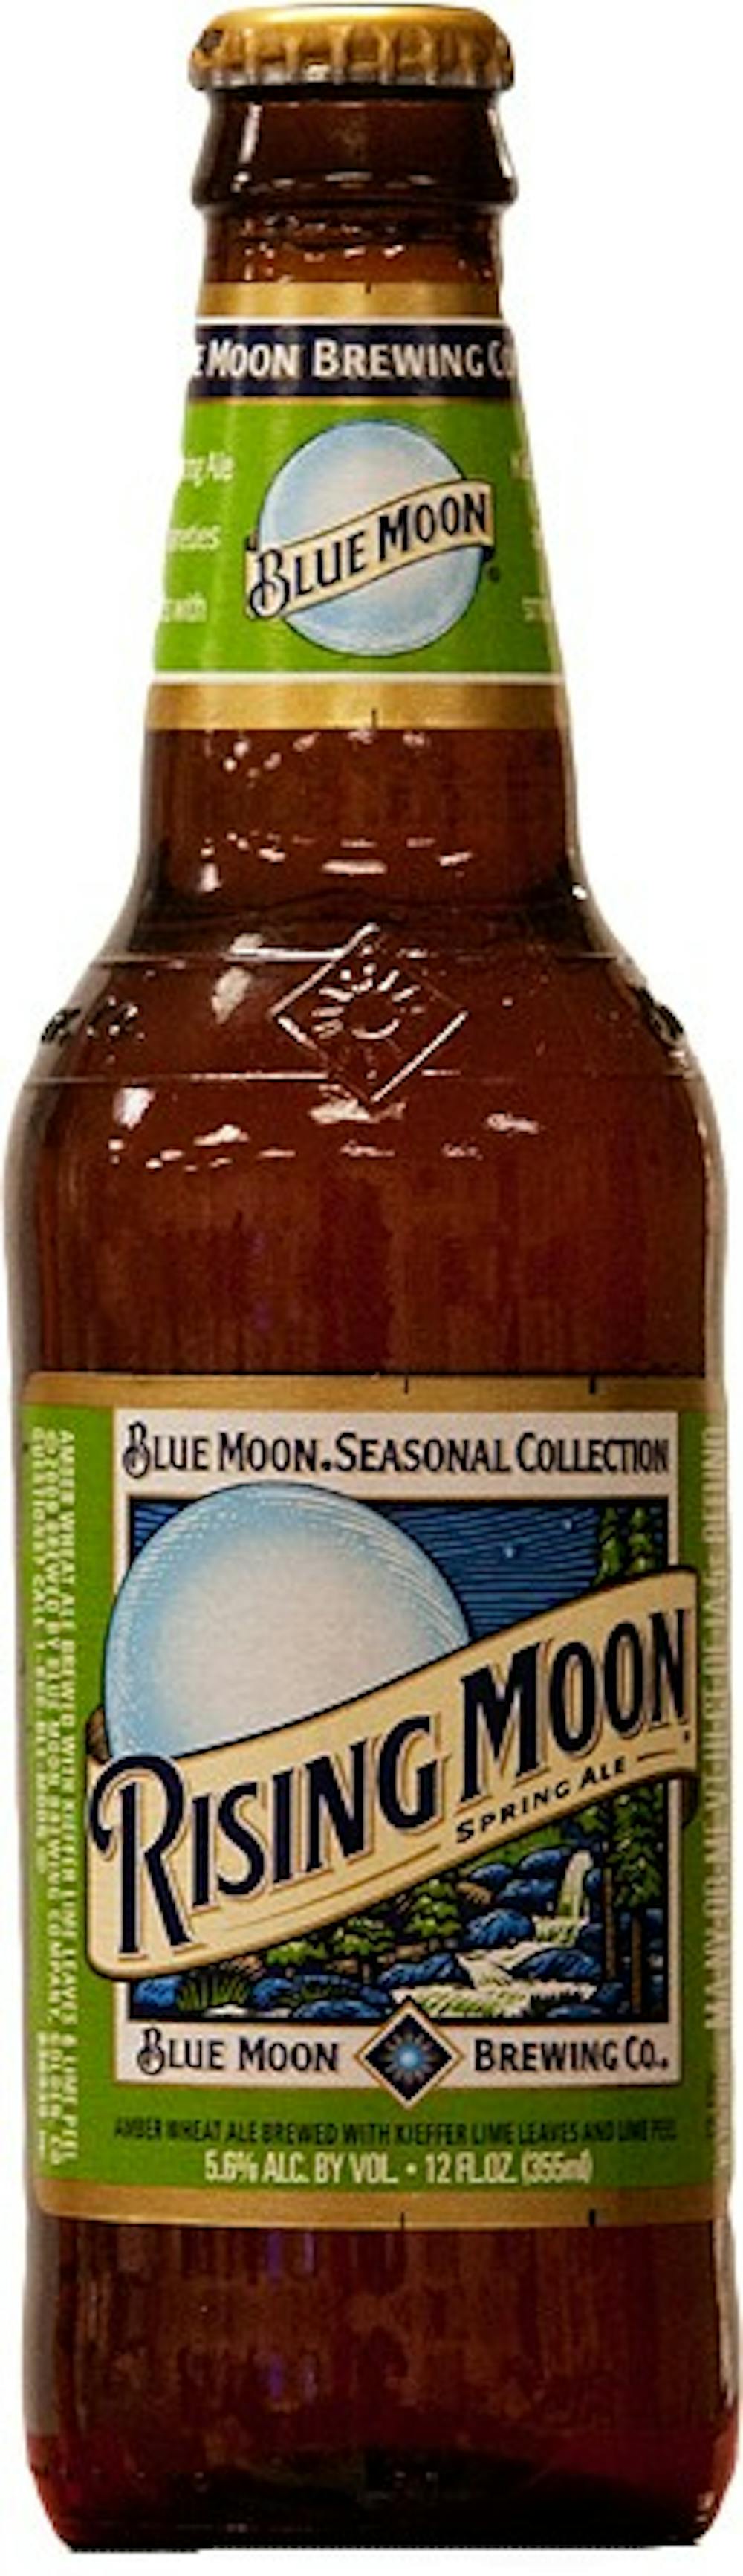 New Beer Thursday--Rising Moon Spring Ale